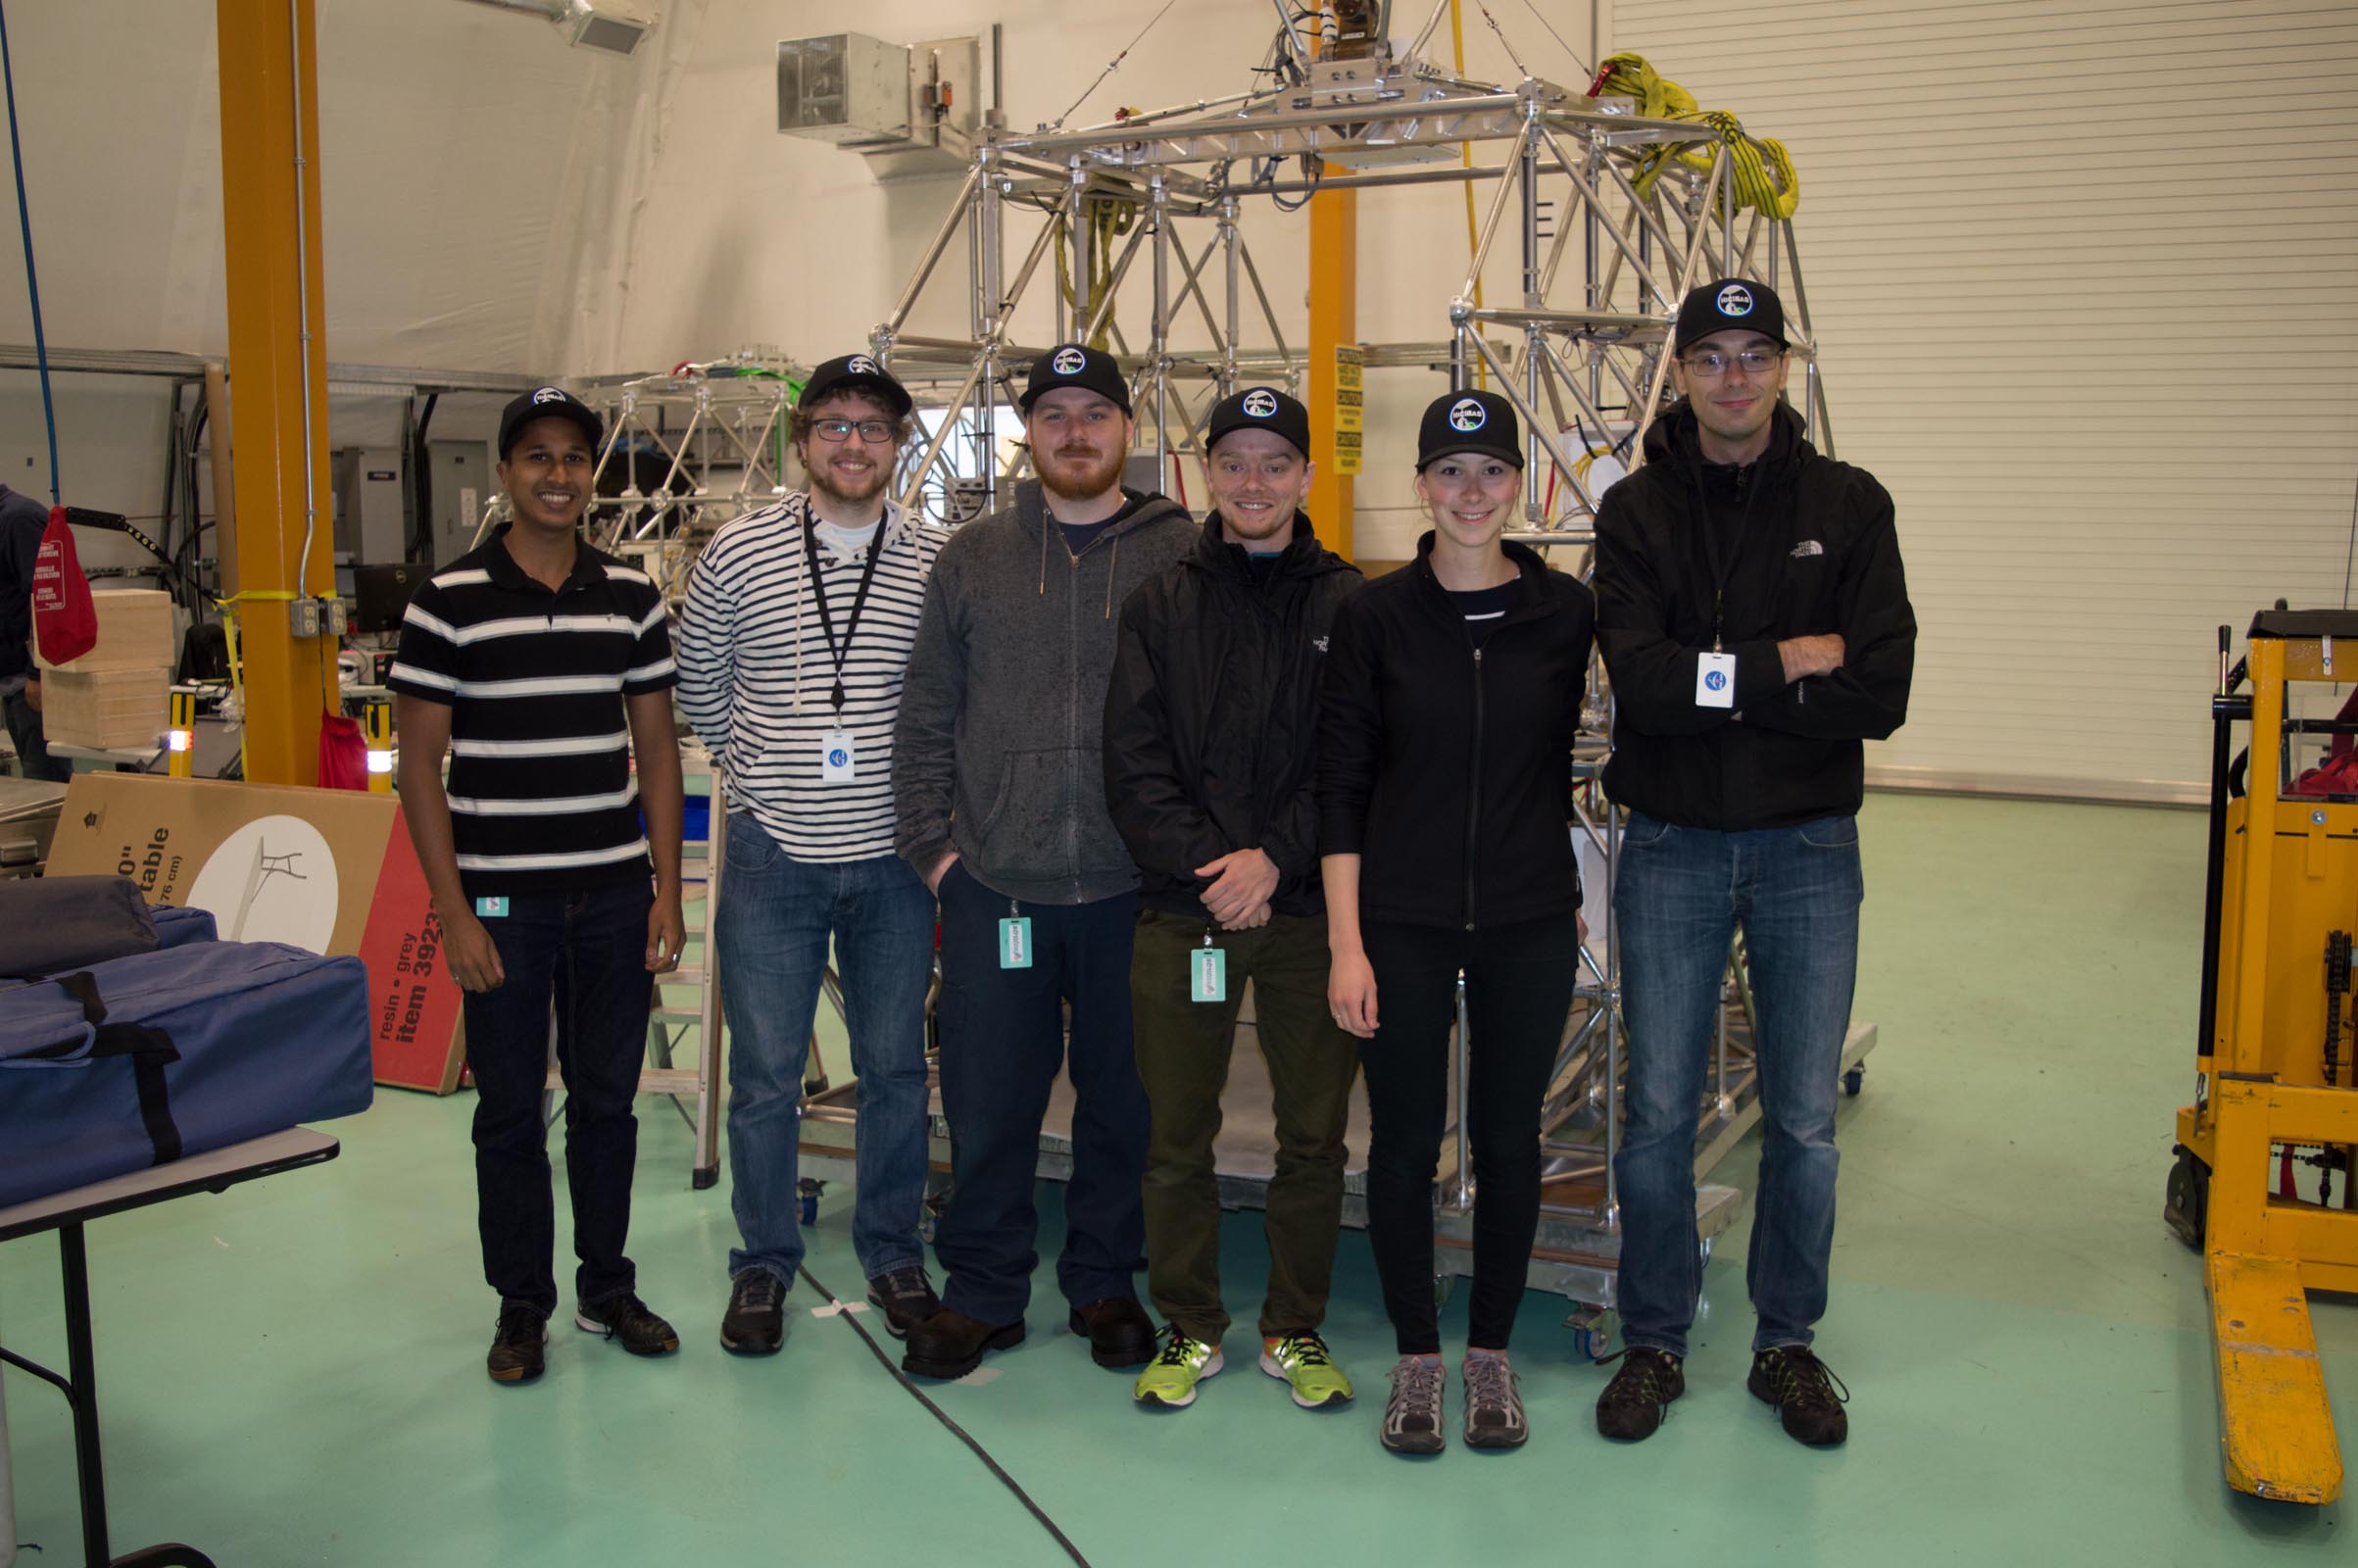 Some HiCIBaS team members at the launch site in Timmins, ON